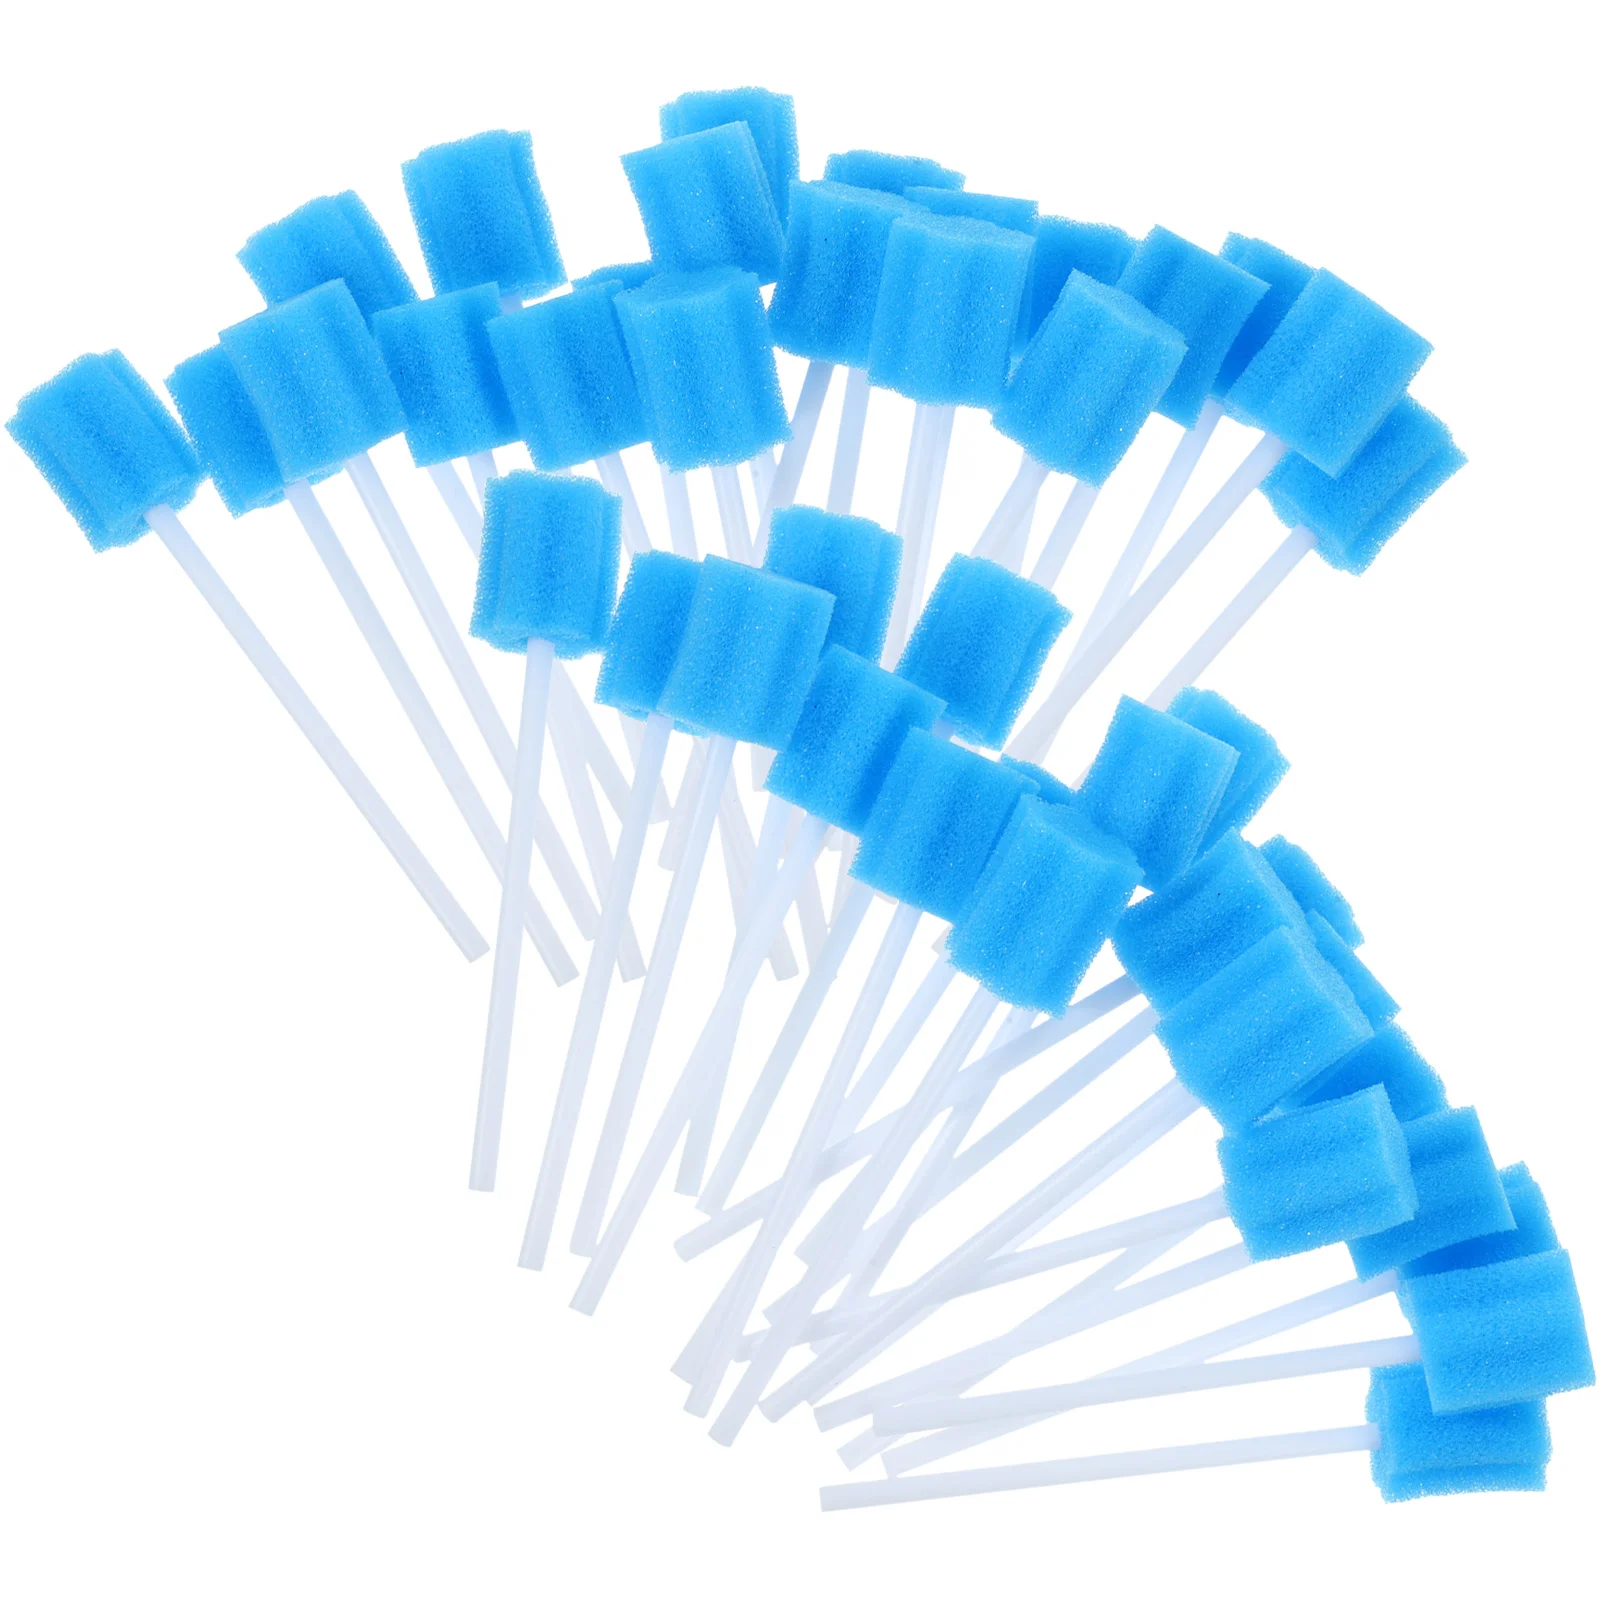 

100PCS Care Swabs Mouth Cleaning Mouth Cleaner Sponge Supplies for Adults Kids Senior Blue Isopropylic alchohol